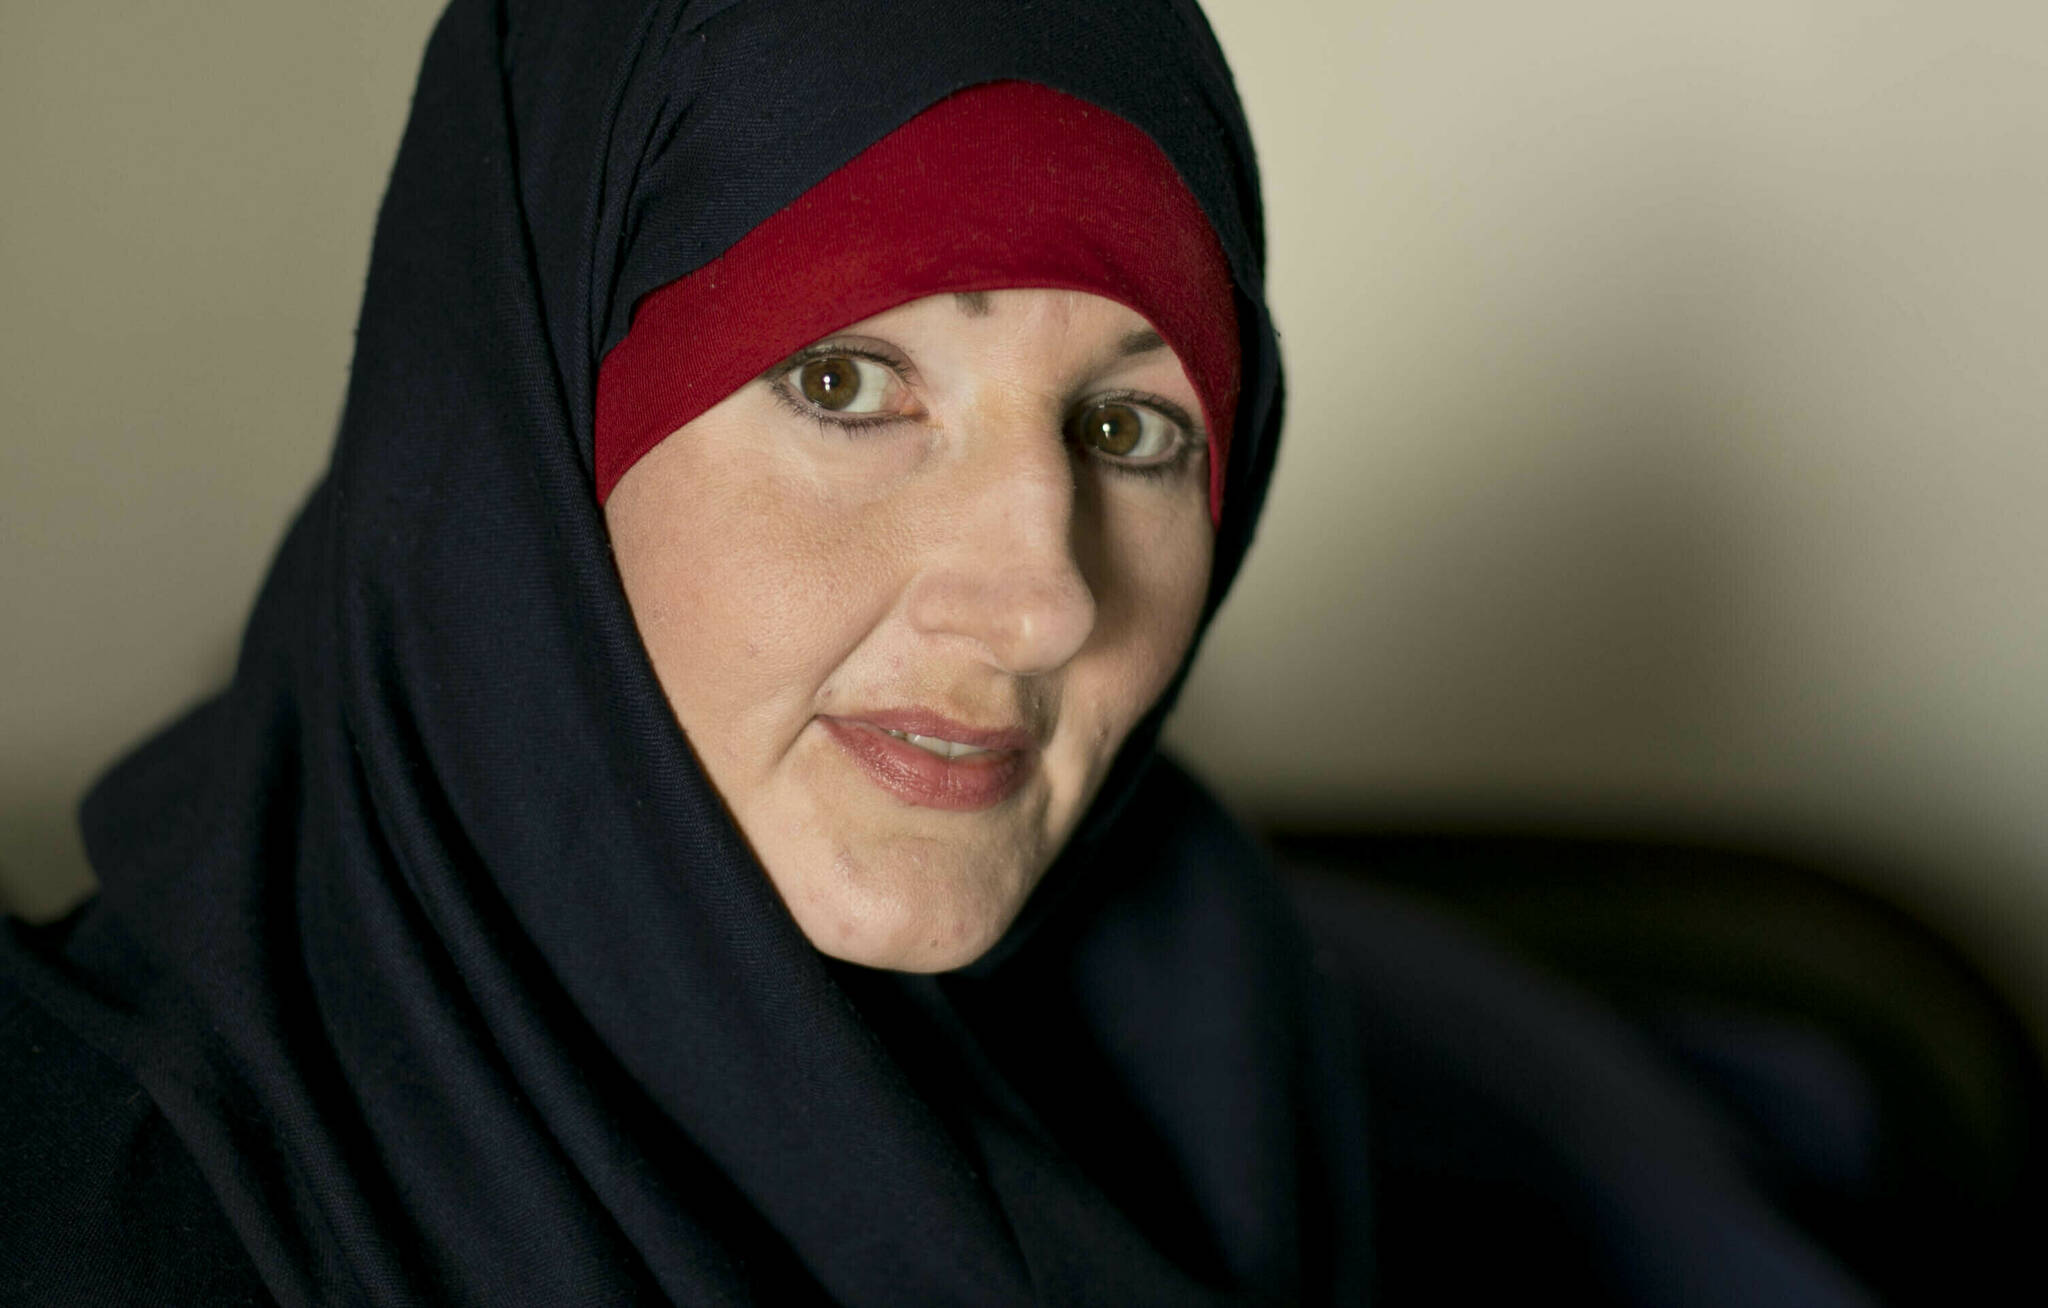 FILE - Kimberly Gwen Polman, a Canadian national, poses for a portrait at camp Roj in Syria, April 3, 2019. Canadian authorities are preventing Polman and a child under age 12, who is not related to Polman, who are detained in a camp in Syria from returning home for life-saving medical treatment, contradicting policies that allow such repatriations, Human Rights Watch, a prominent rights group said Tuesday, Feb. 22, 2022. (AP Photo/Maya Alleruzzo, File)